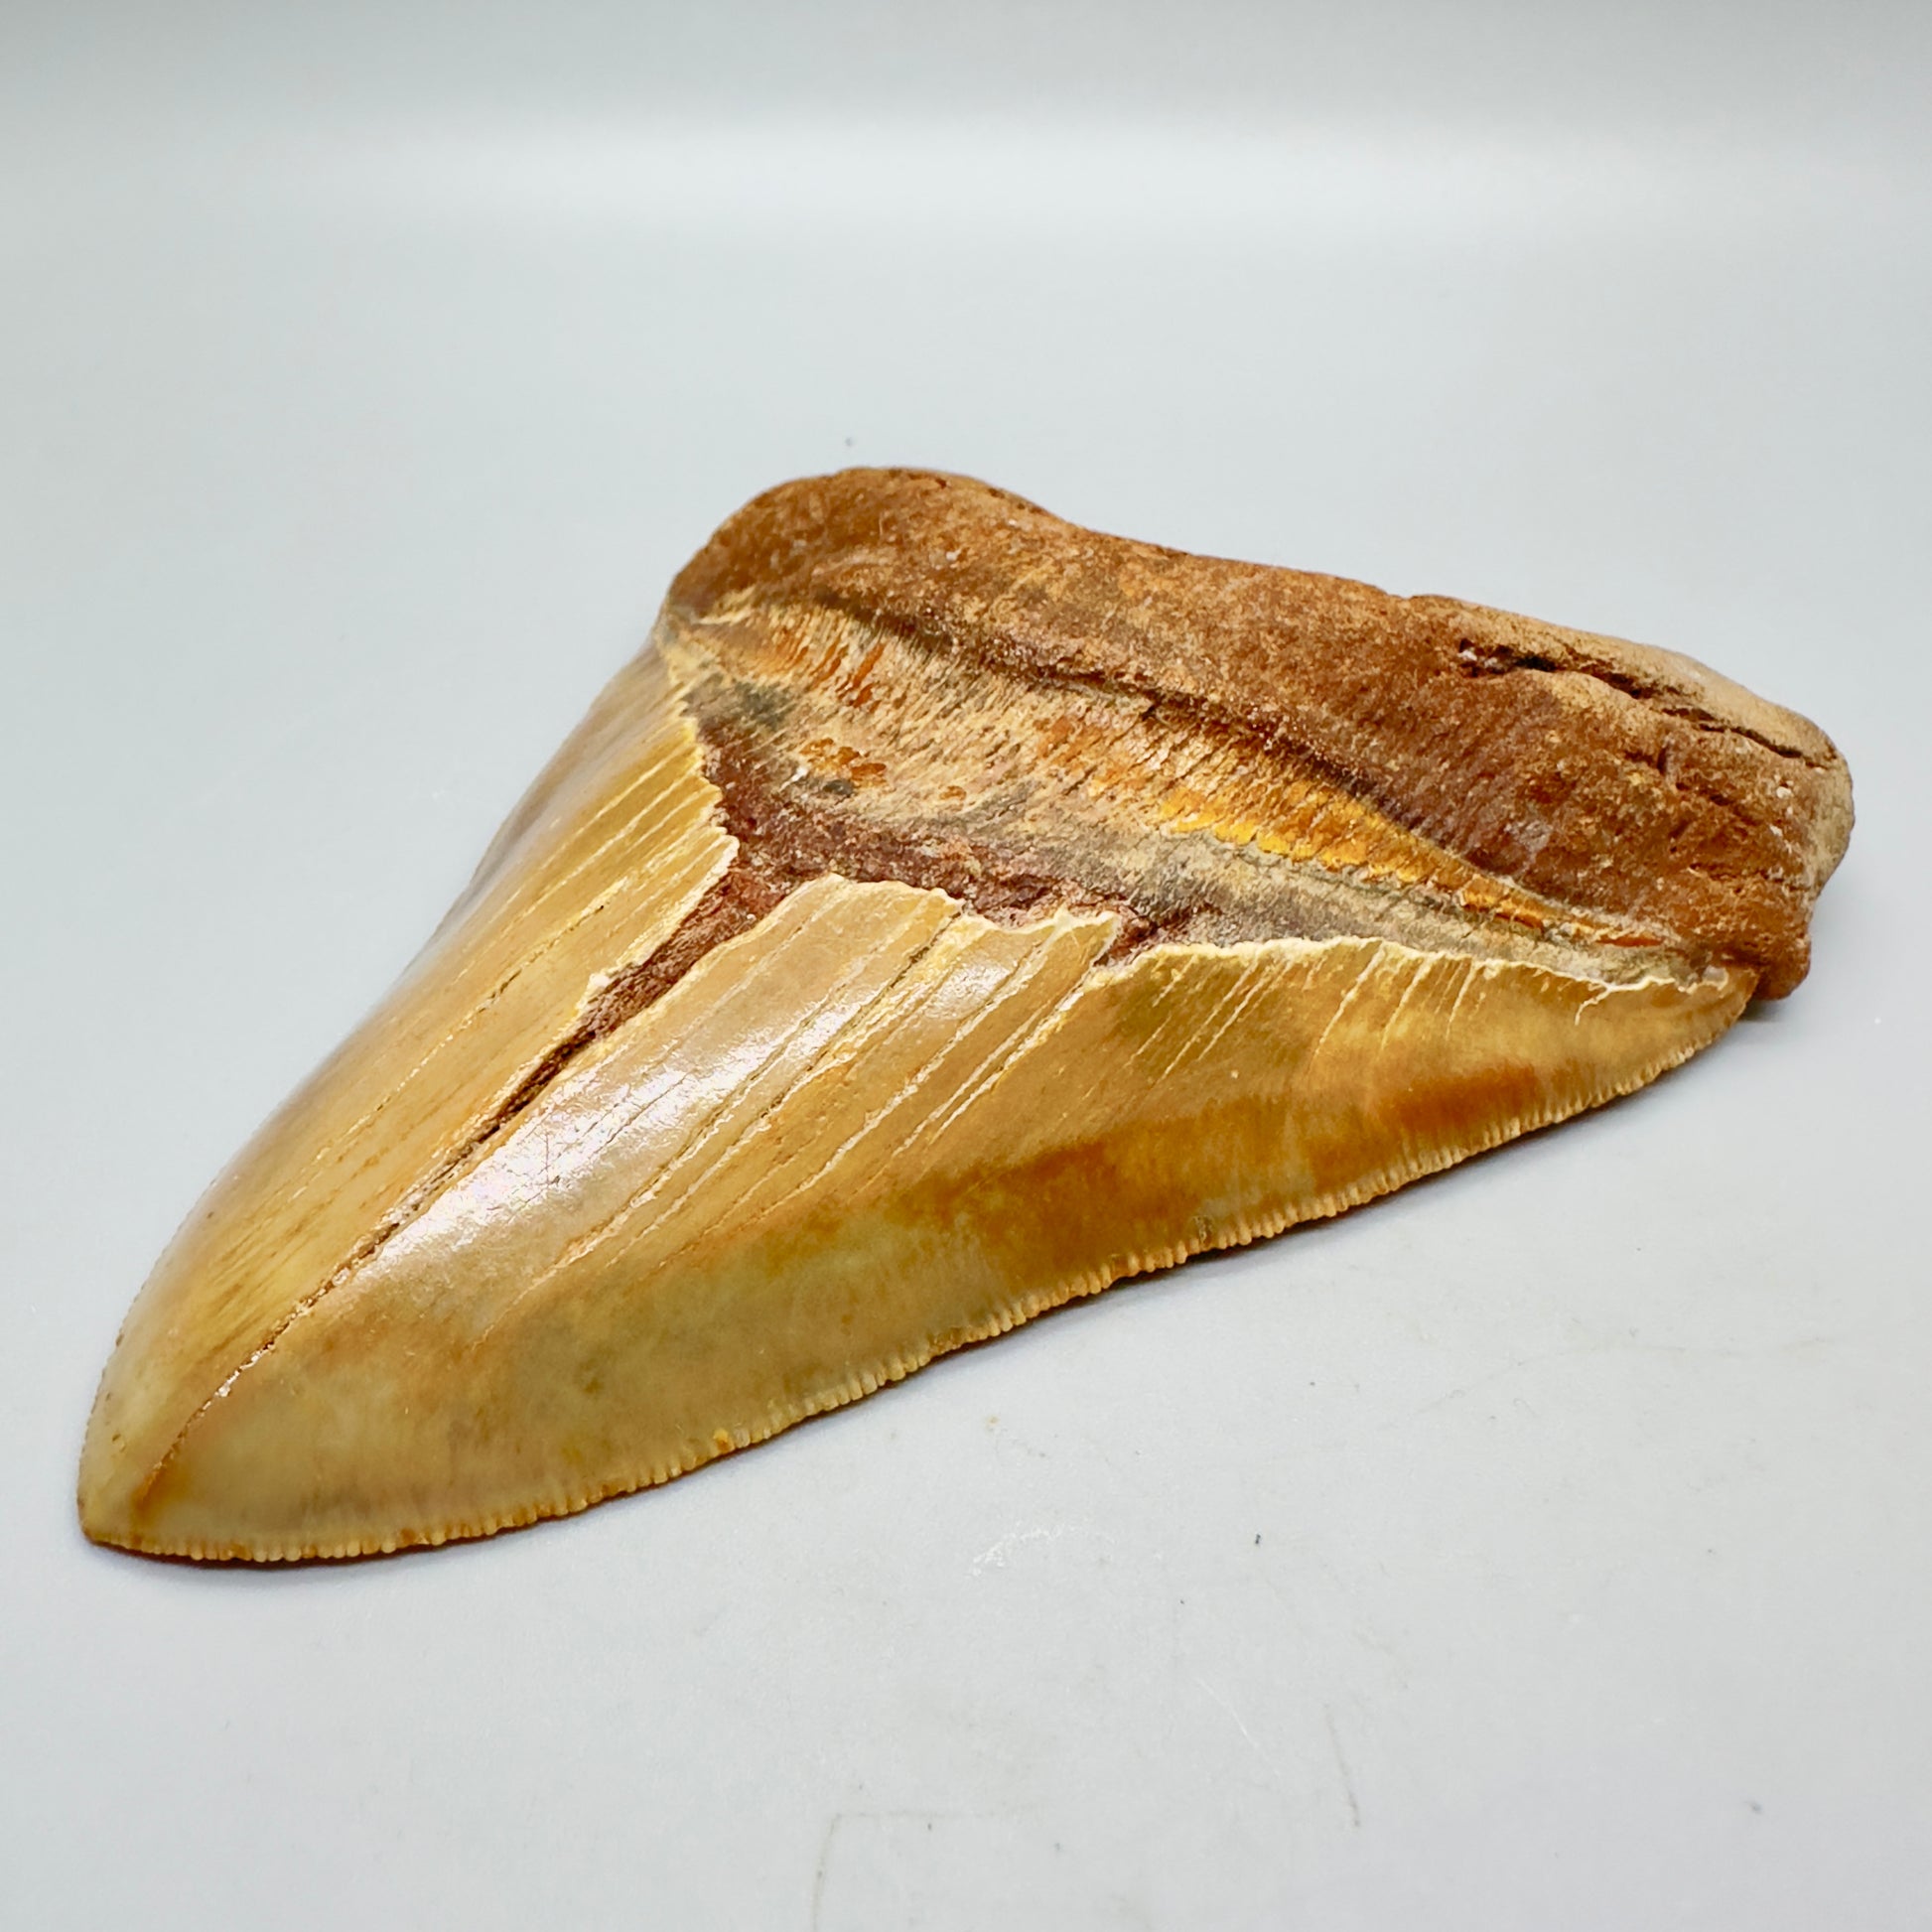 sharply serrated green and gold colors 5.39" long Fossil Megalodon Tooth from North Carolina CM4573 - Front right